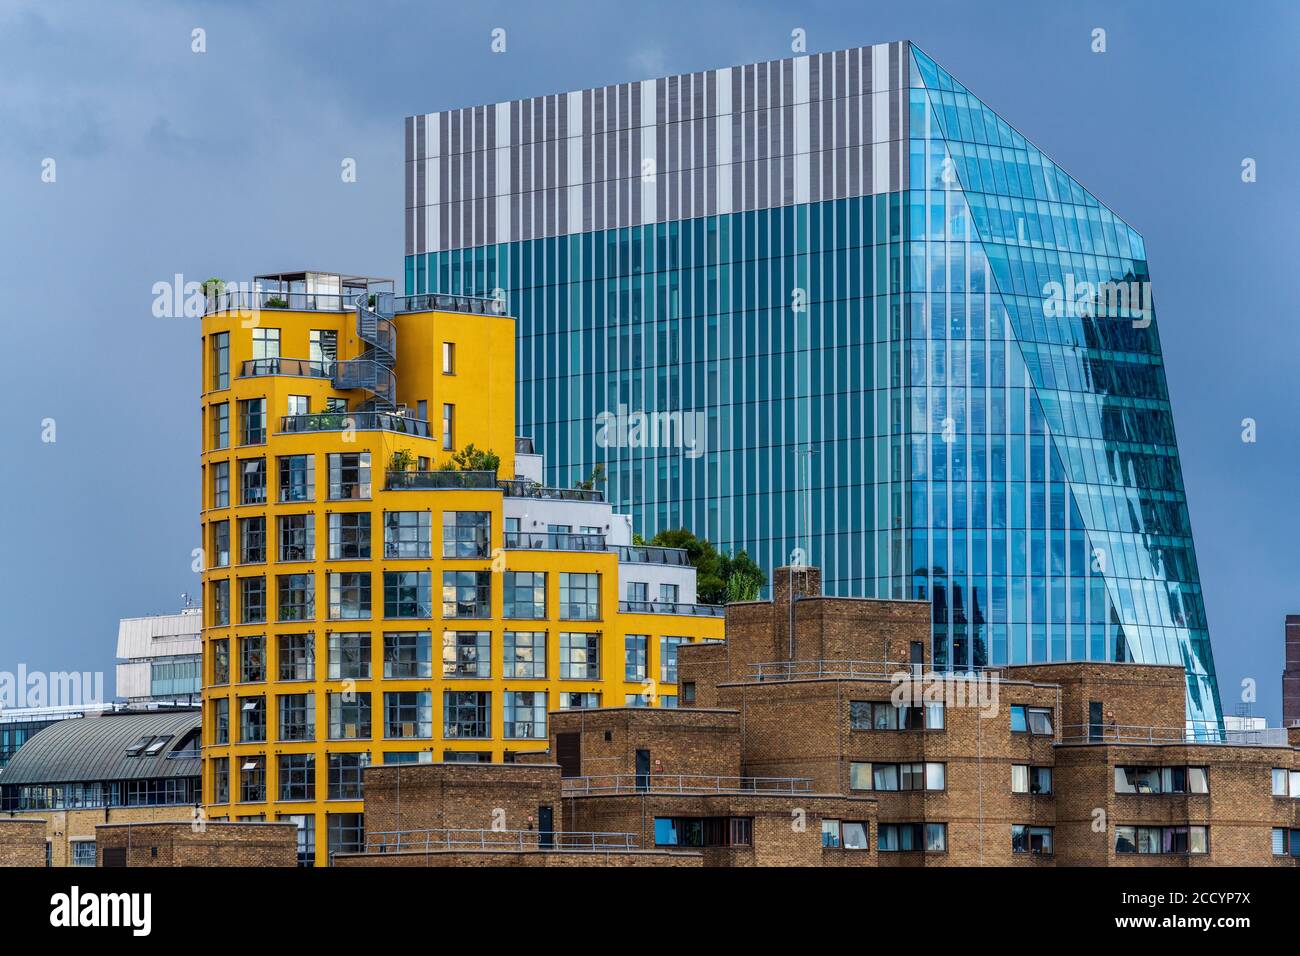 Yellow Bankside Lofts Apartments sulla Southbank di Londra (Costruito nel 1995-98 architetto Piers Gough CZWG) & 240 Blackfriars Road Building Behind (2014 AHMM) Foto Stock